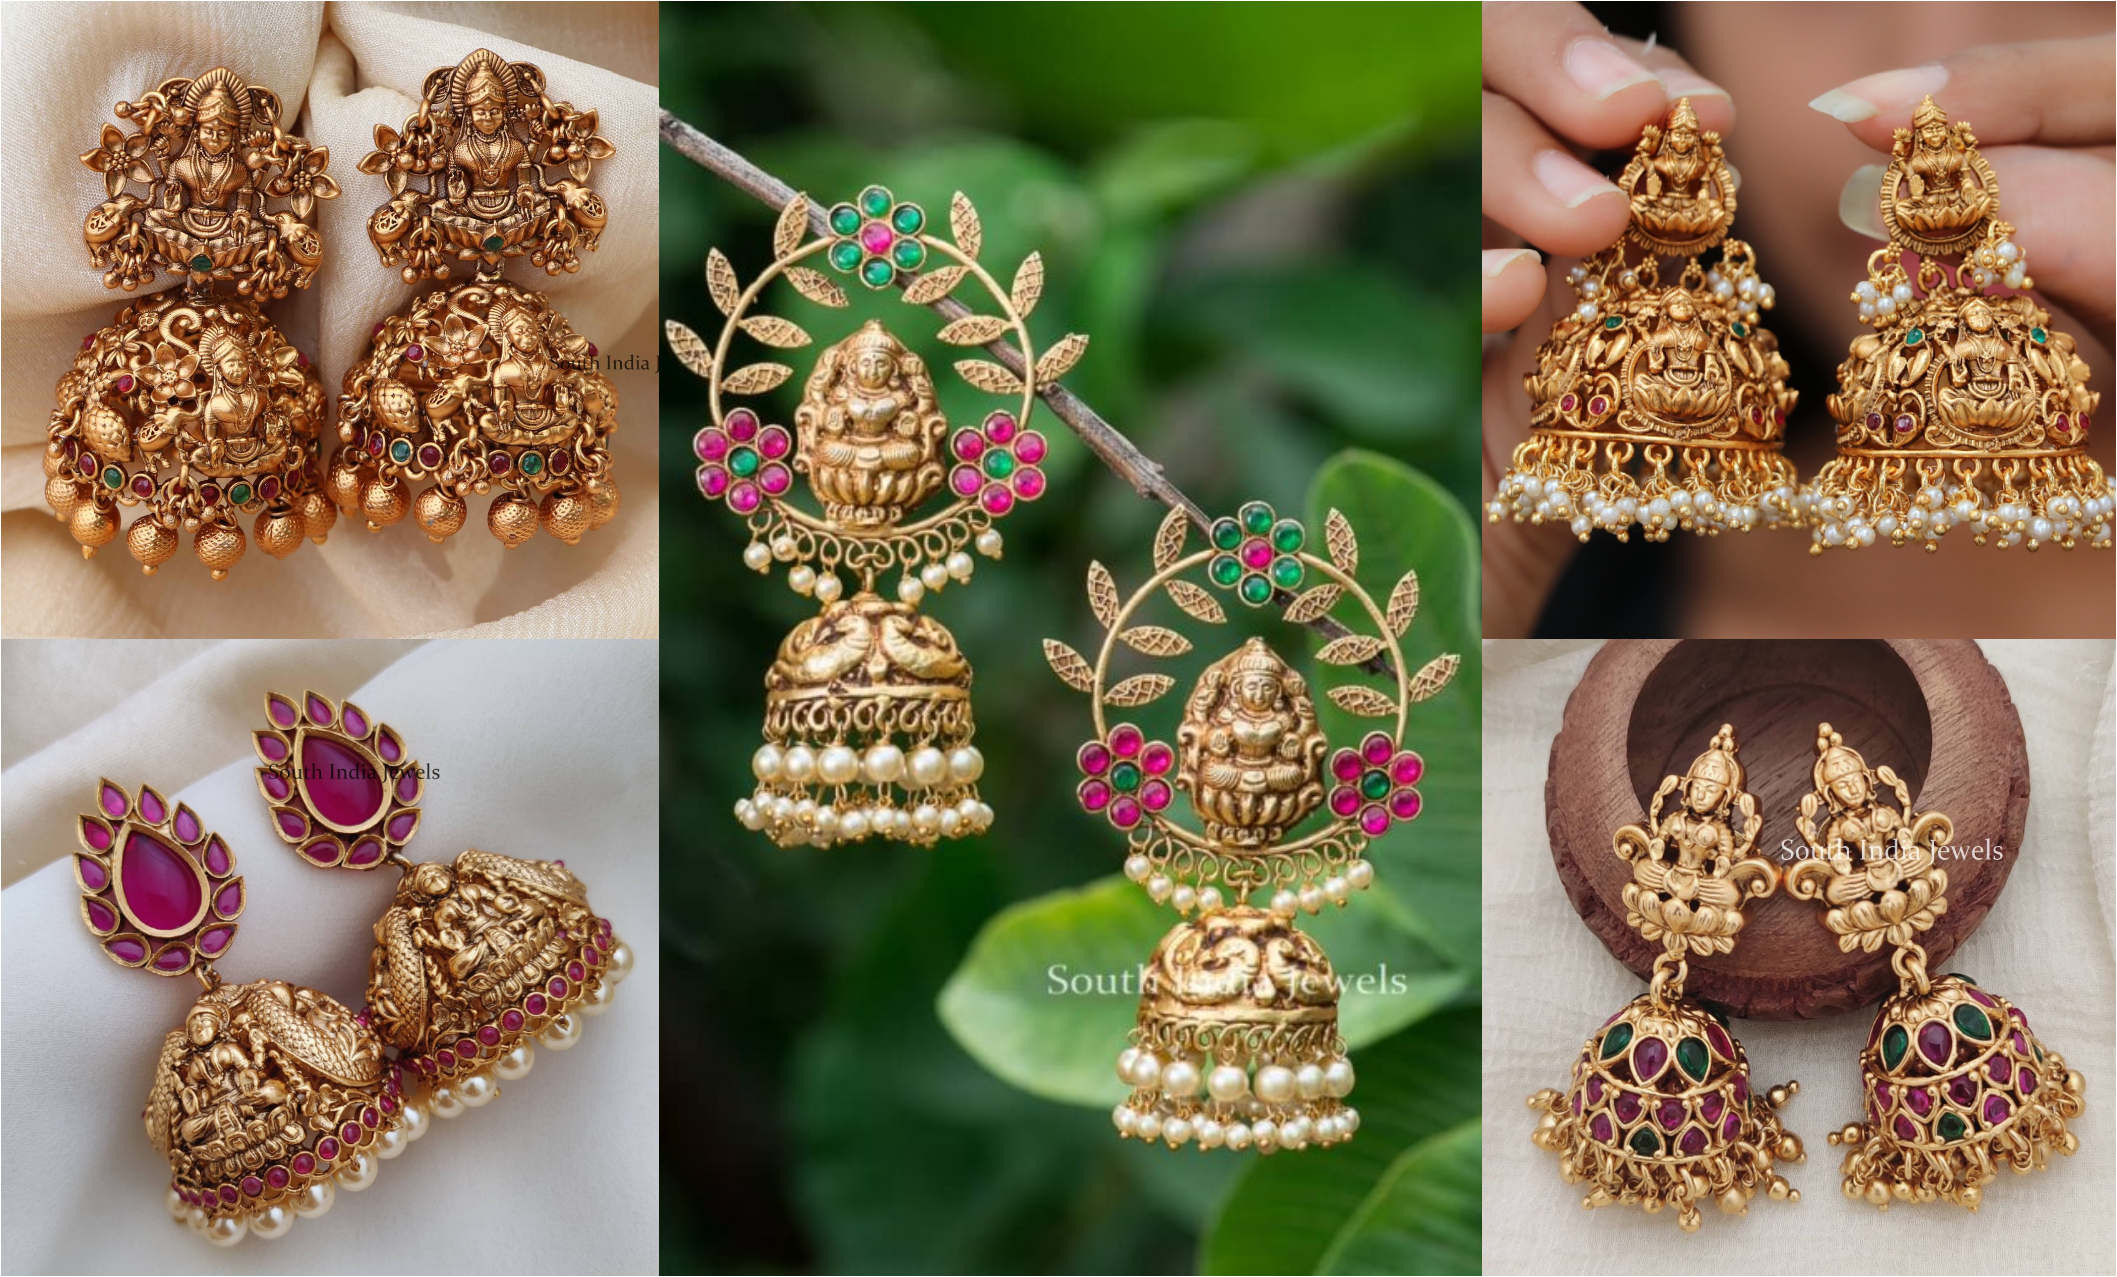 55 Beautiful Gold jhumka earring designs || Tips on Jhumka shopping | Gold  jhumka earrings, Gold earrings designs, Gold jewelry fashion